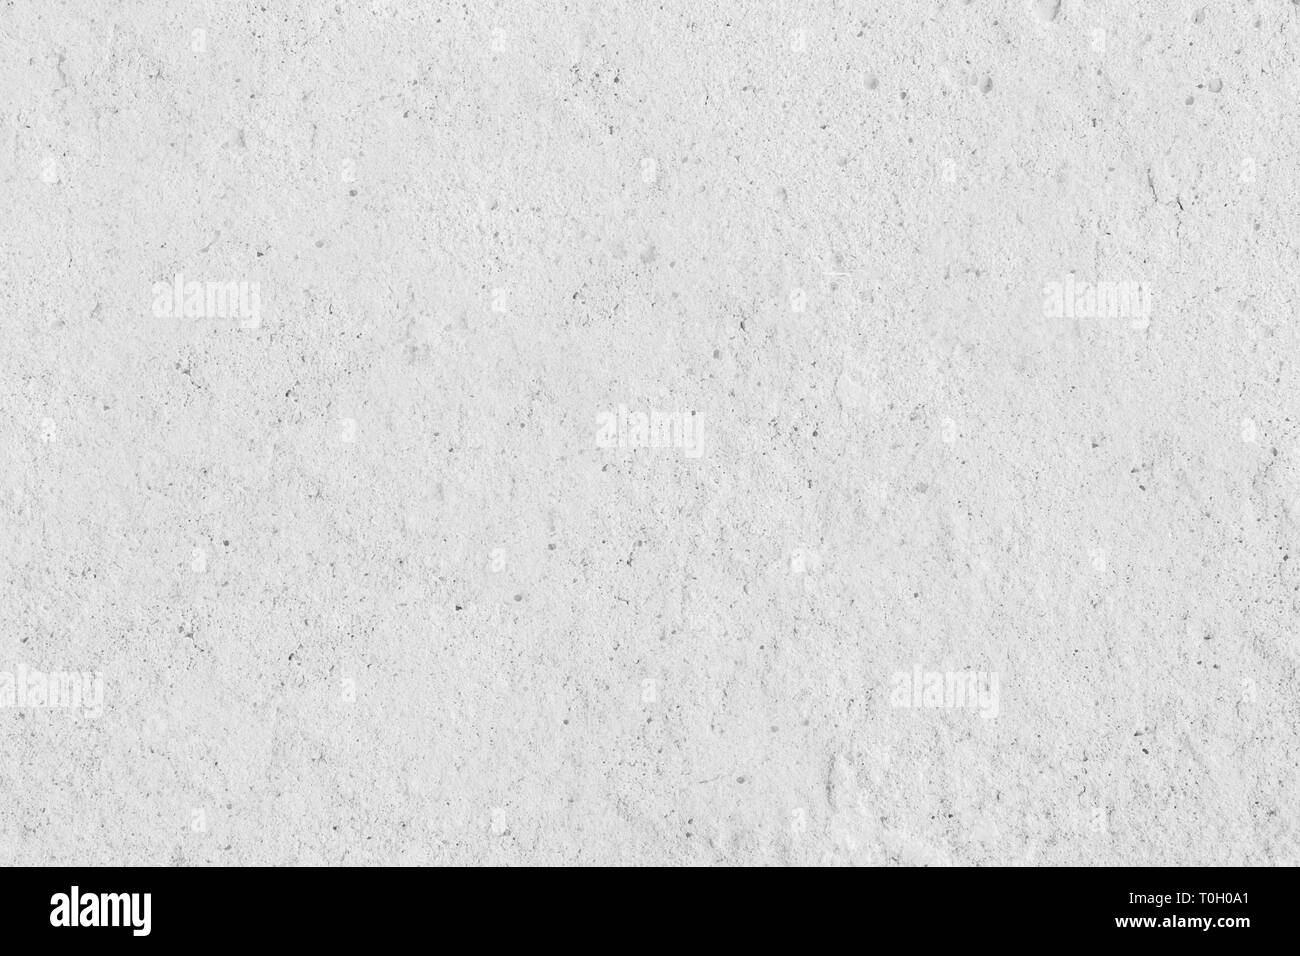 White concreted wall for interiors or outdoor exposed surface polished concrete. Cement have sand and stone of tone vintage, natural patterns old anti Stock Photo